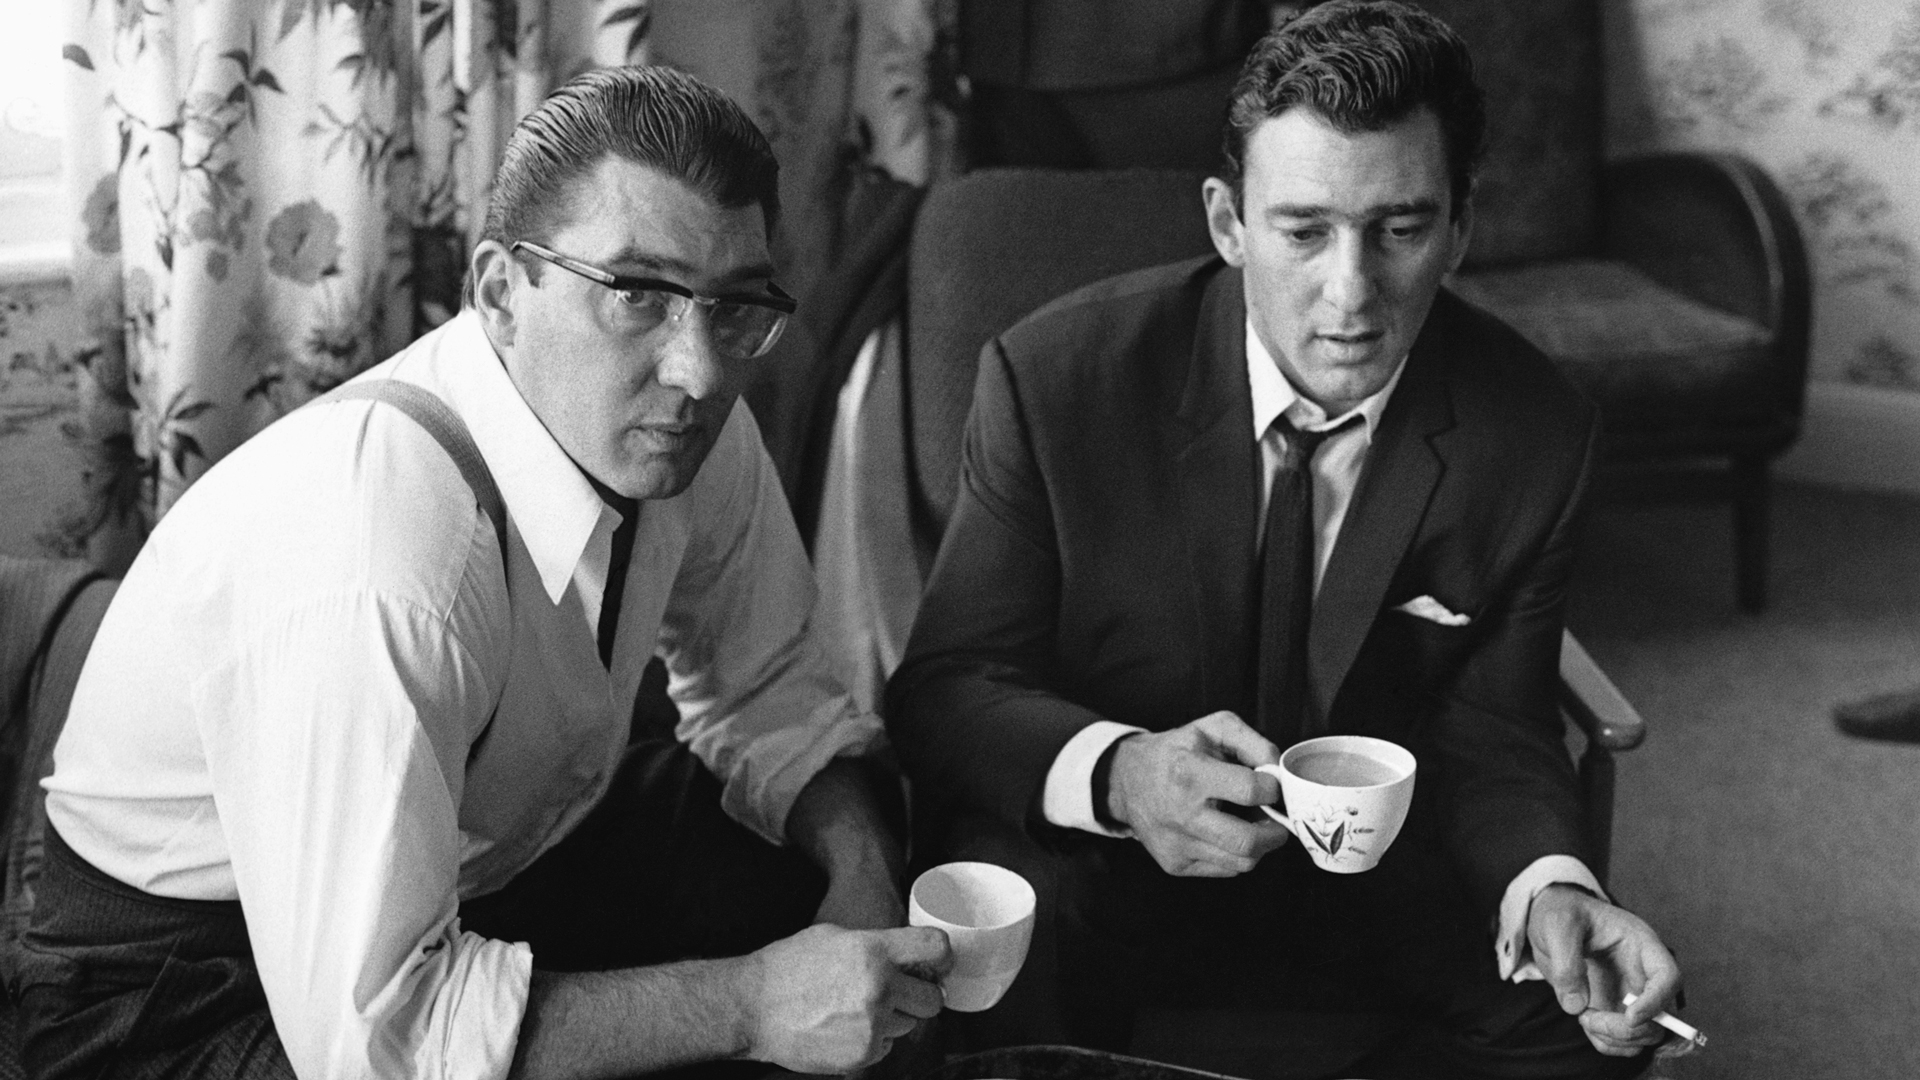 The Kray Twins: British Gangsters Mingled with Celebrities While Murdering